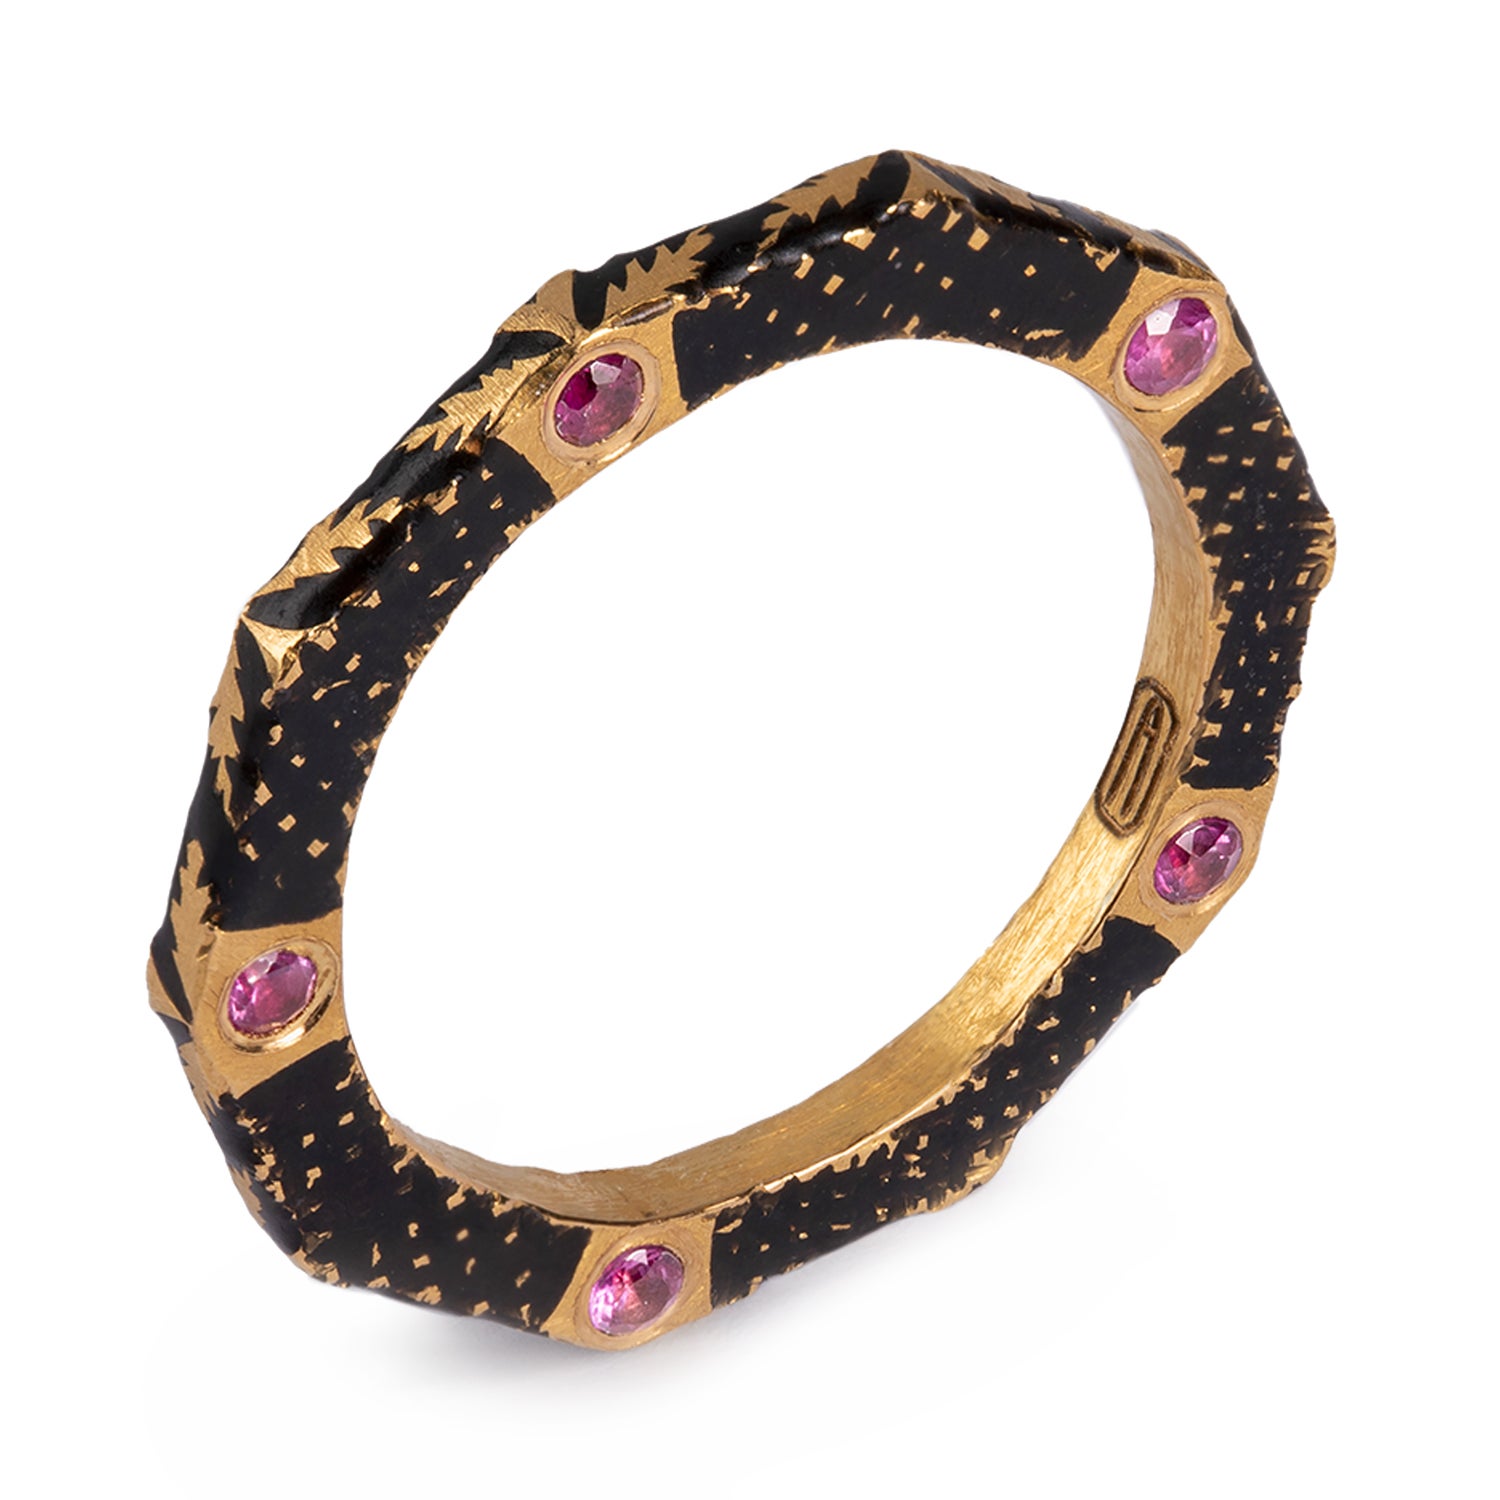 22K Gold Handmade Decagon Shaped Black Enamel Band Ring with Sapphires by Agaro